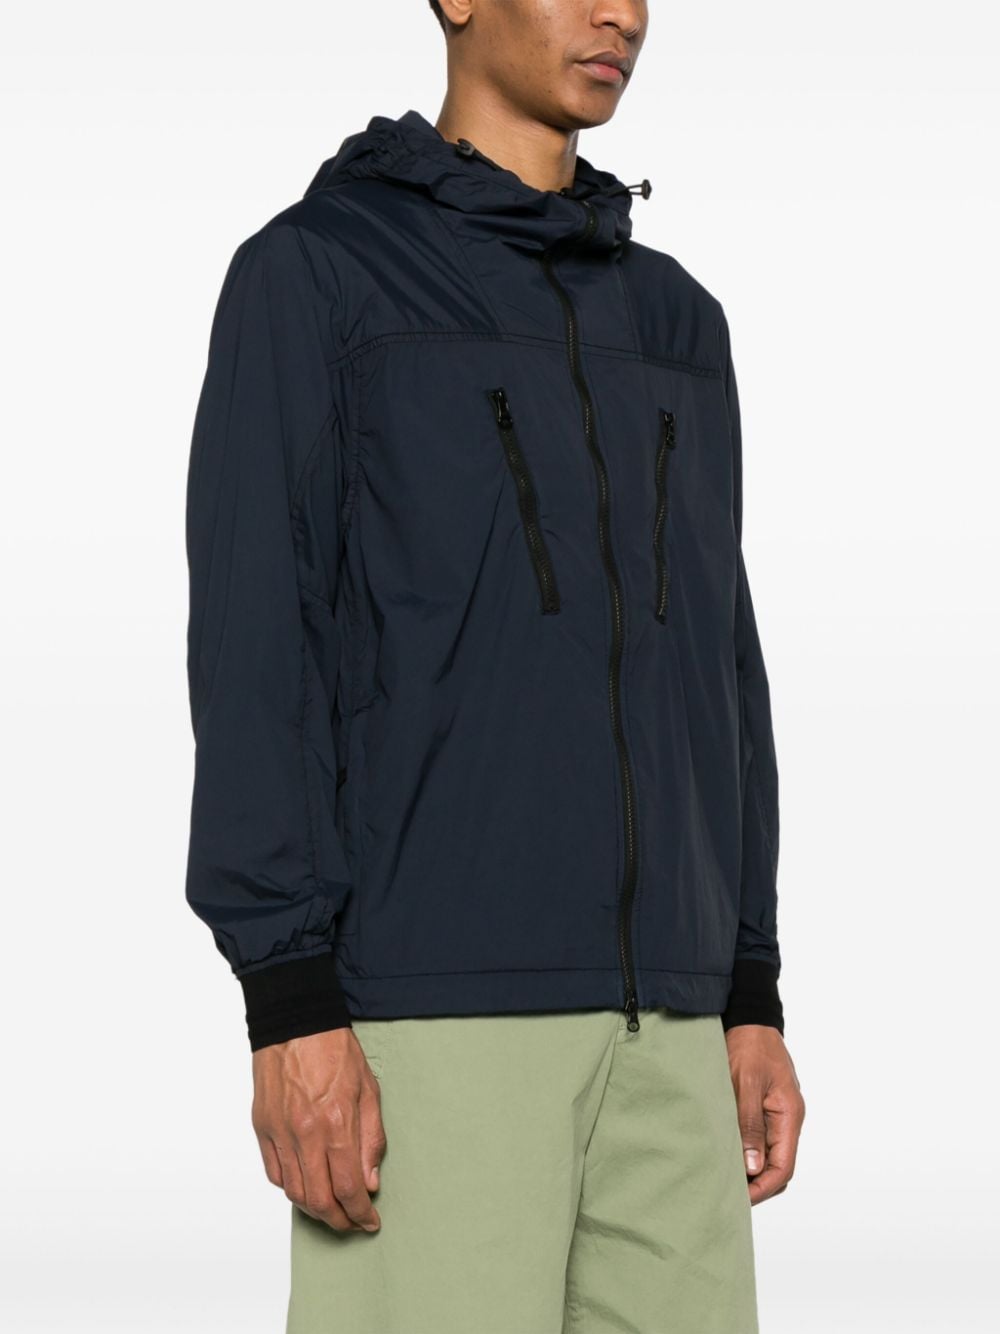 STONE ISLAND Navy Packable Jacket for Men - SS24 Collection